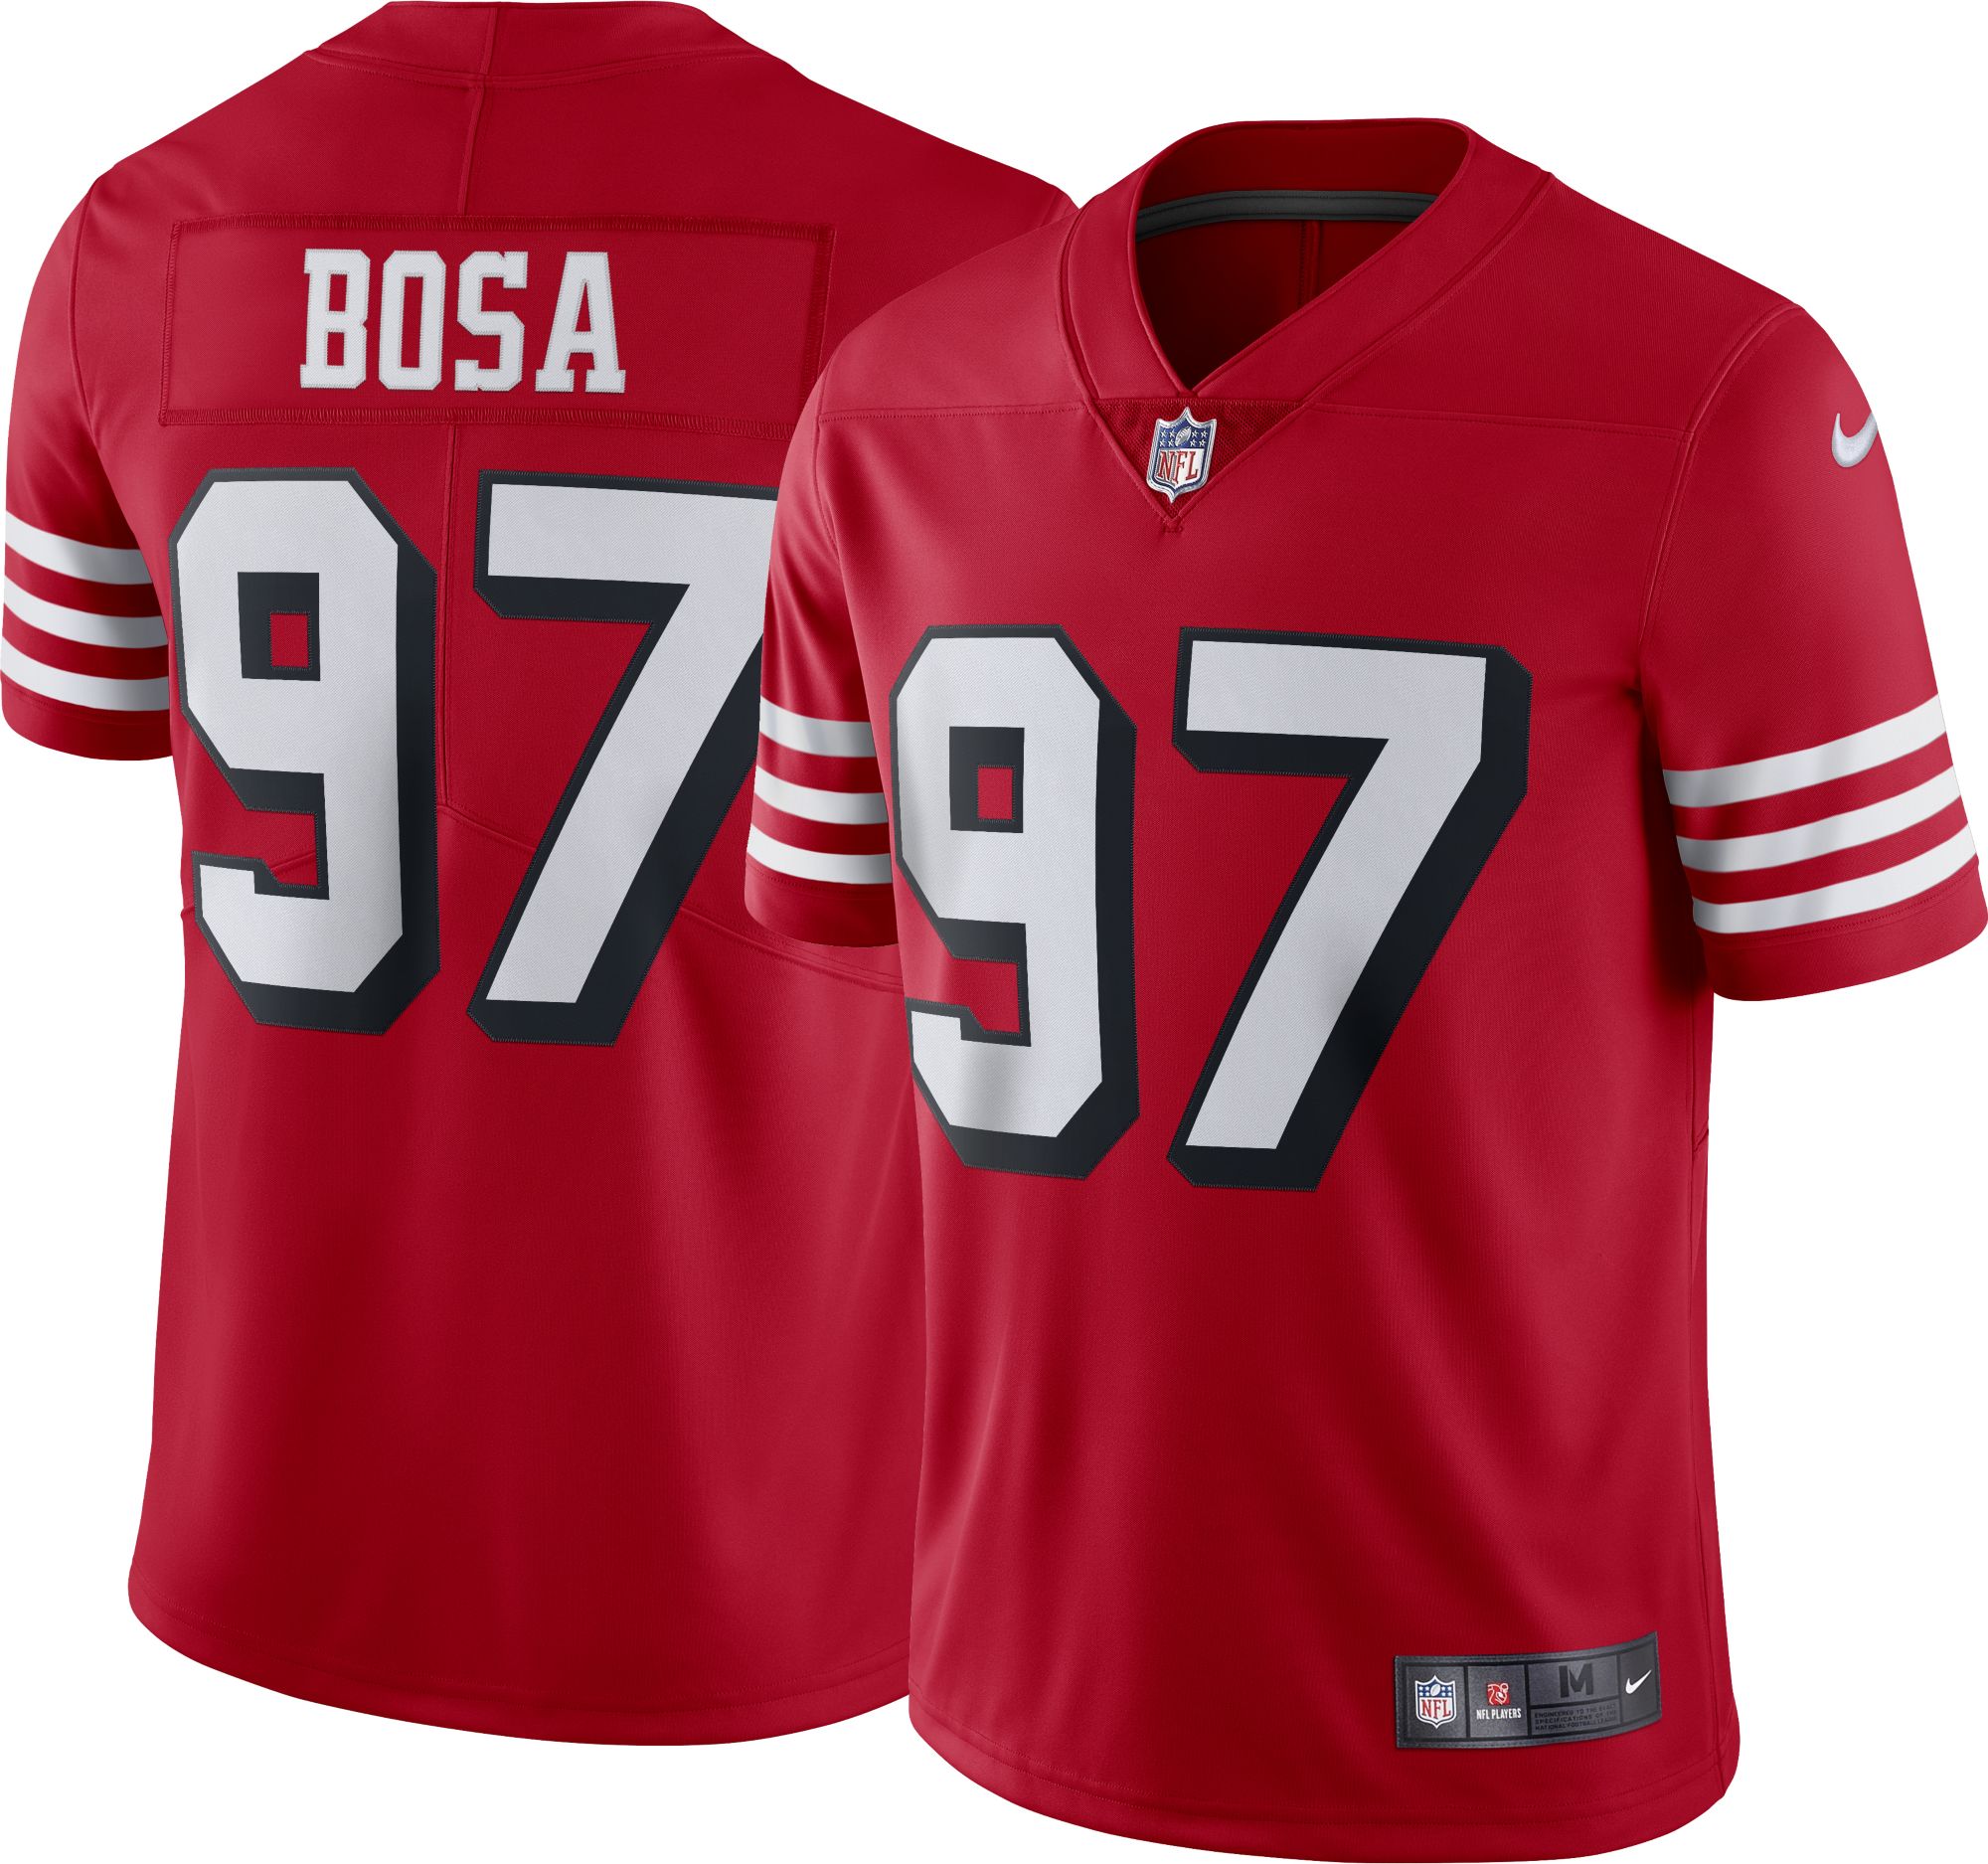 black and red nick bosa jersey